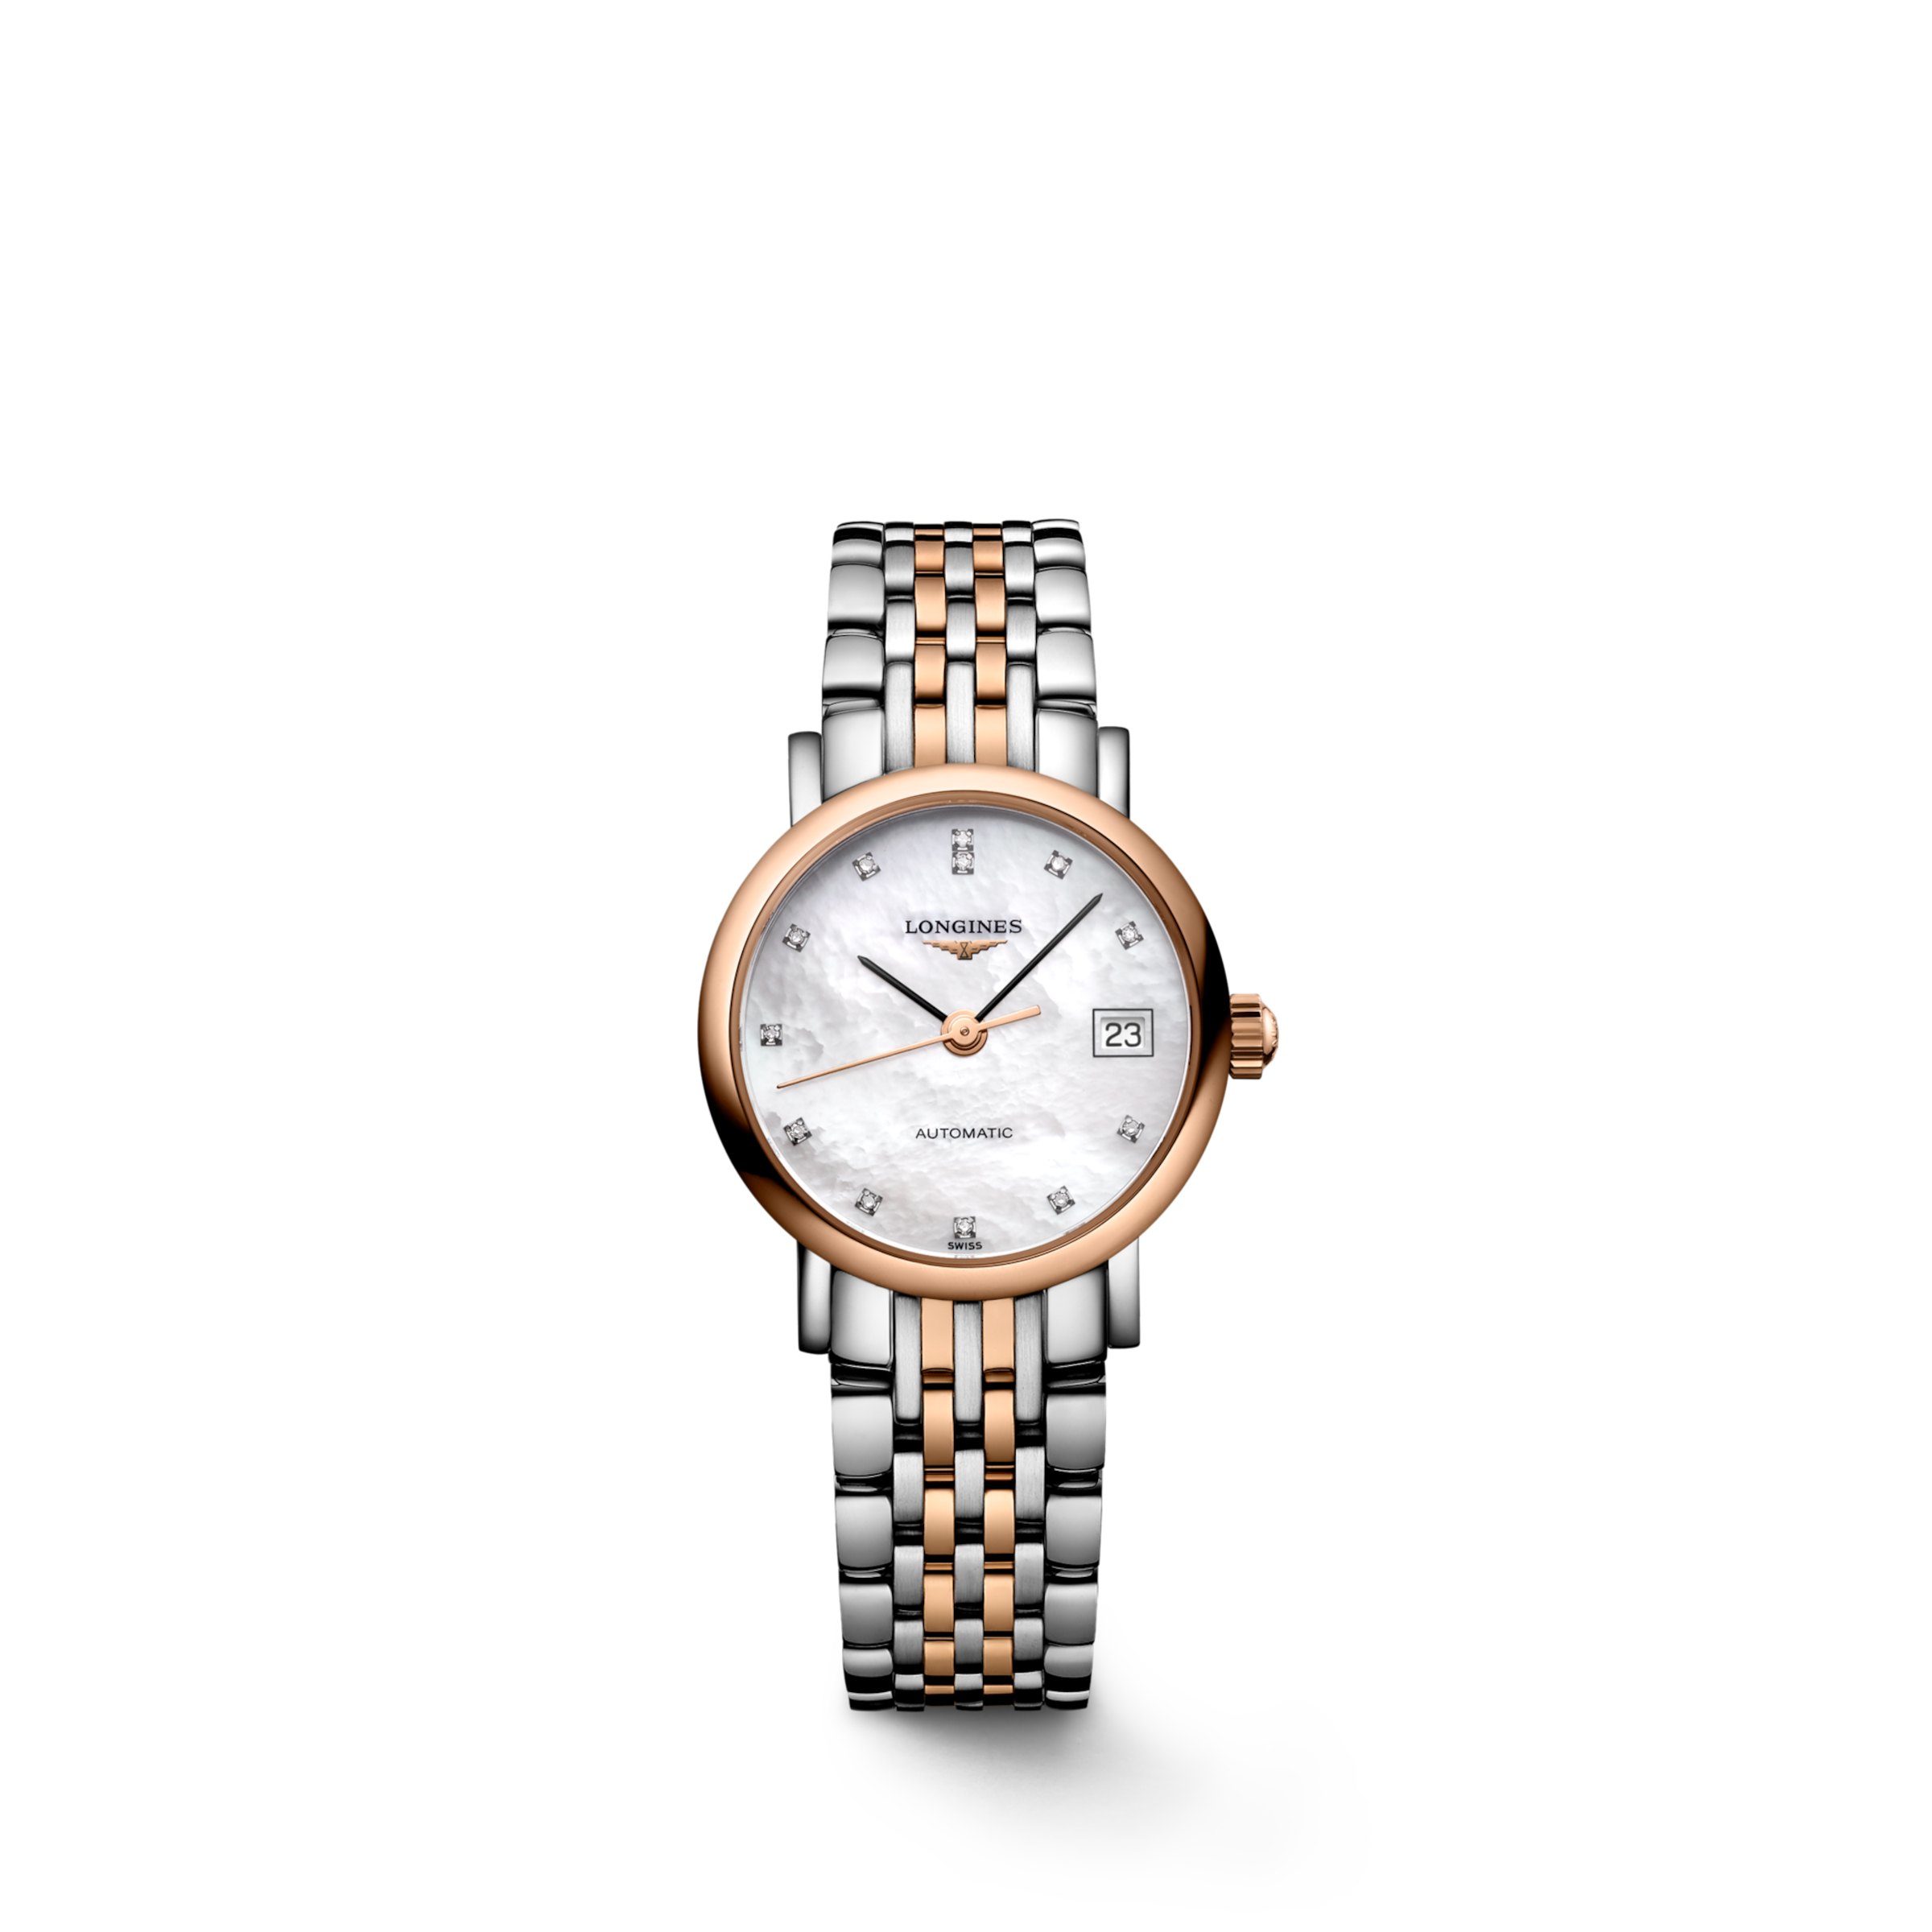 Longines ELEGANT COLLECTION Automatic Stainless steel and 18 karat pink gold cap 200 Watch - L4.309.5.87.7